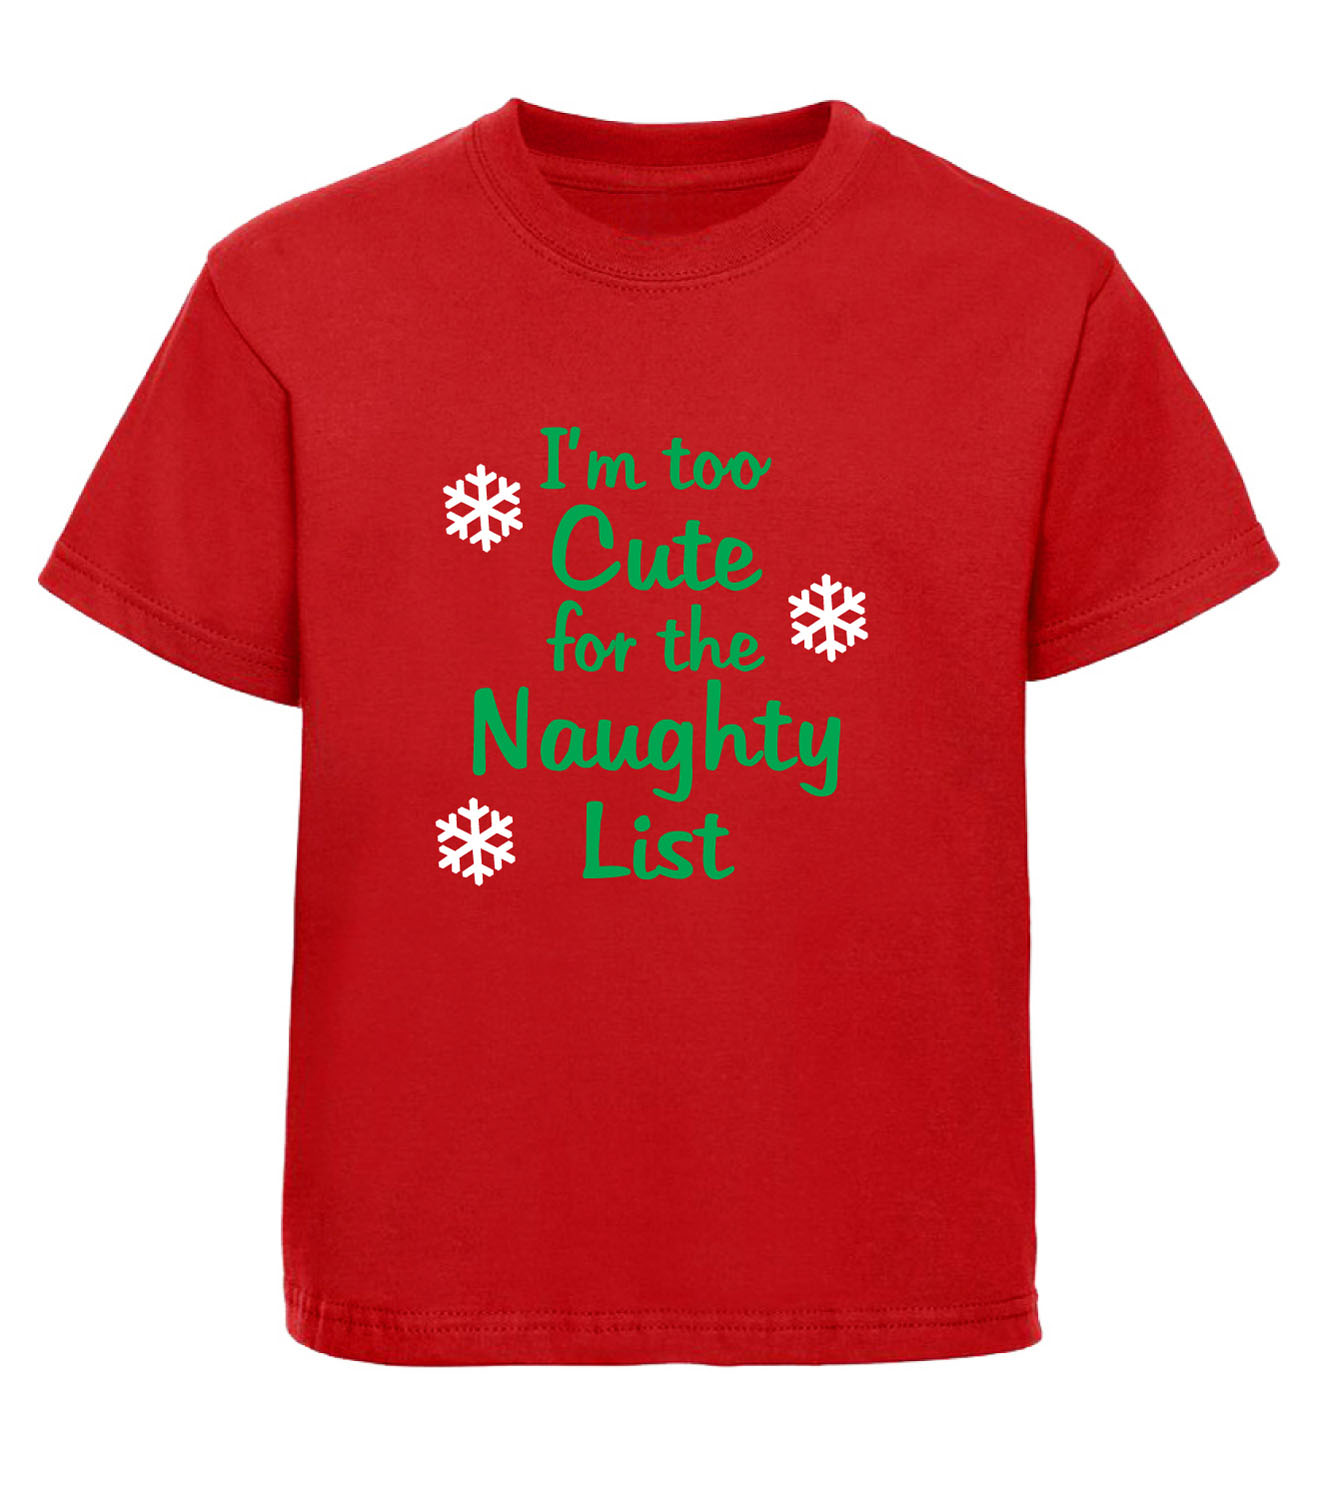 NAUGHTY NICE CHRISTMAS PERSONALISED BABY TODDLER T SHIRT KIDS FUNNY GIFT CUTE 12 